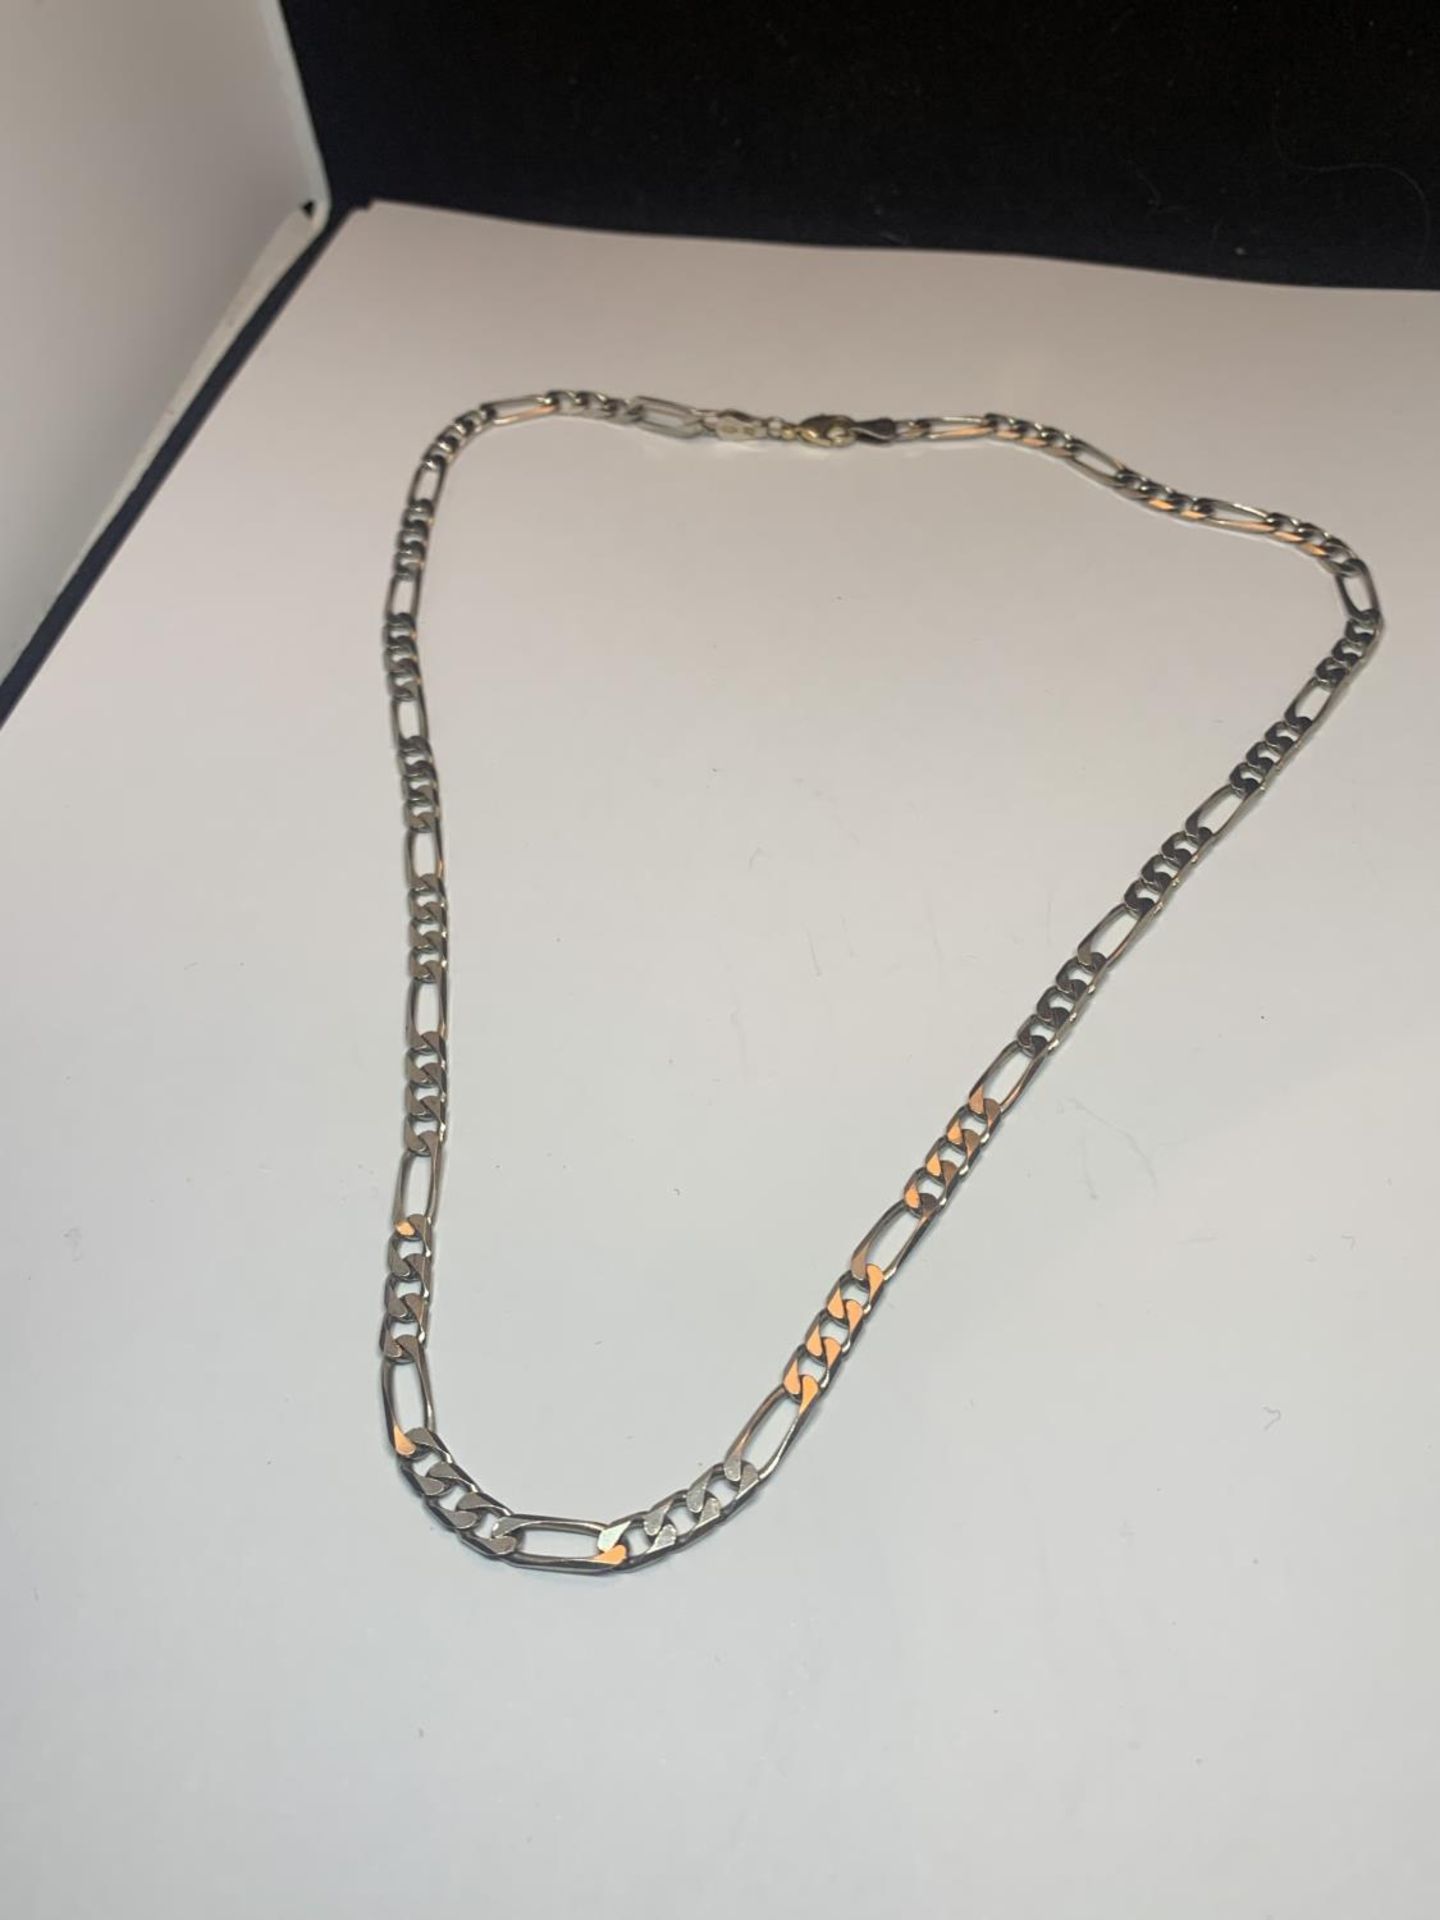 A SILVER FIGARO NECKLACE LENGTH 20 INCHES